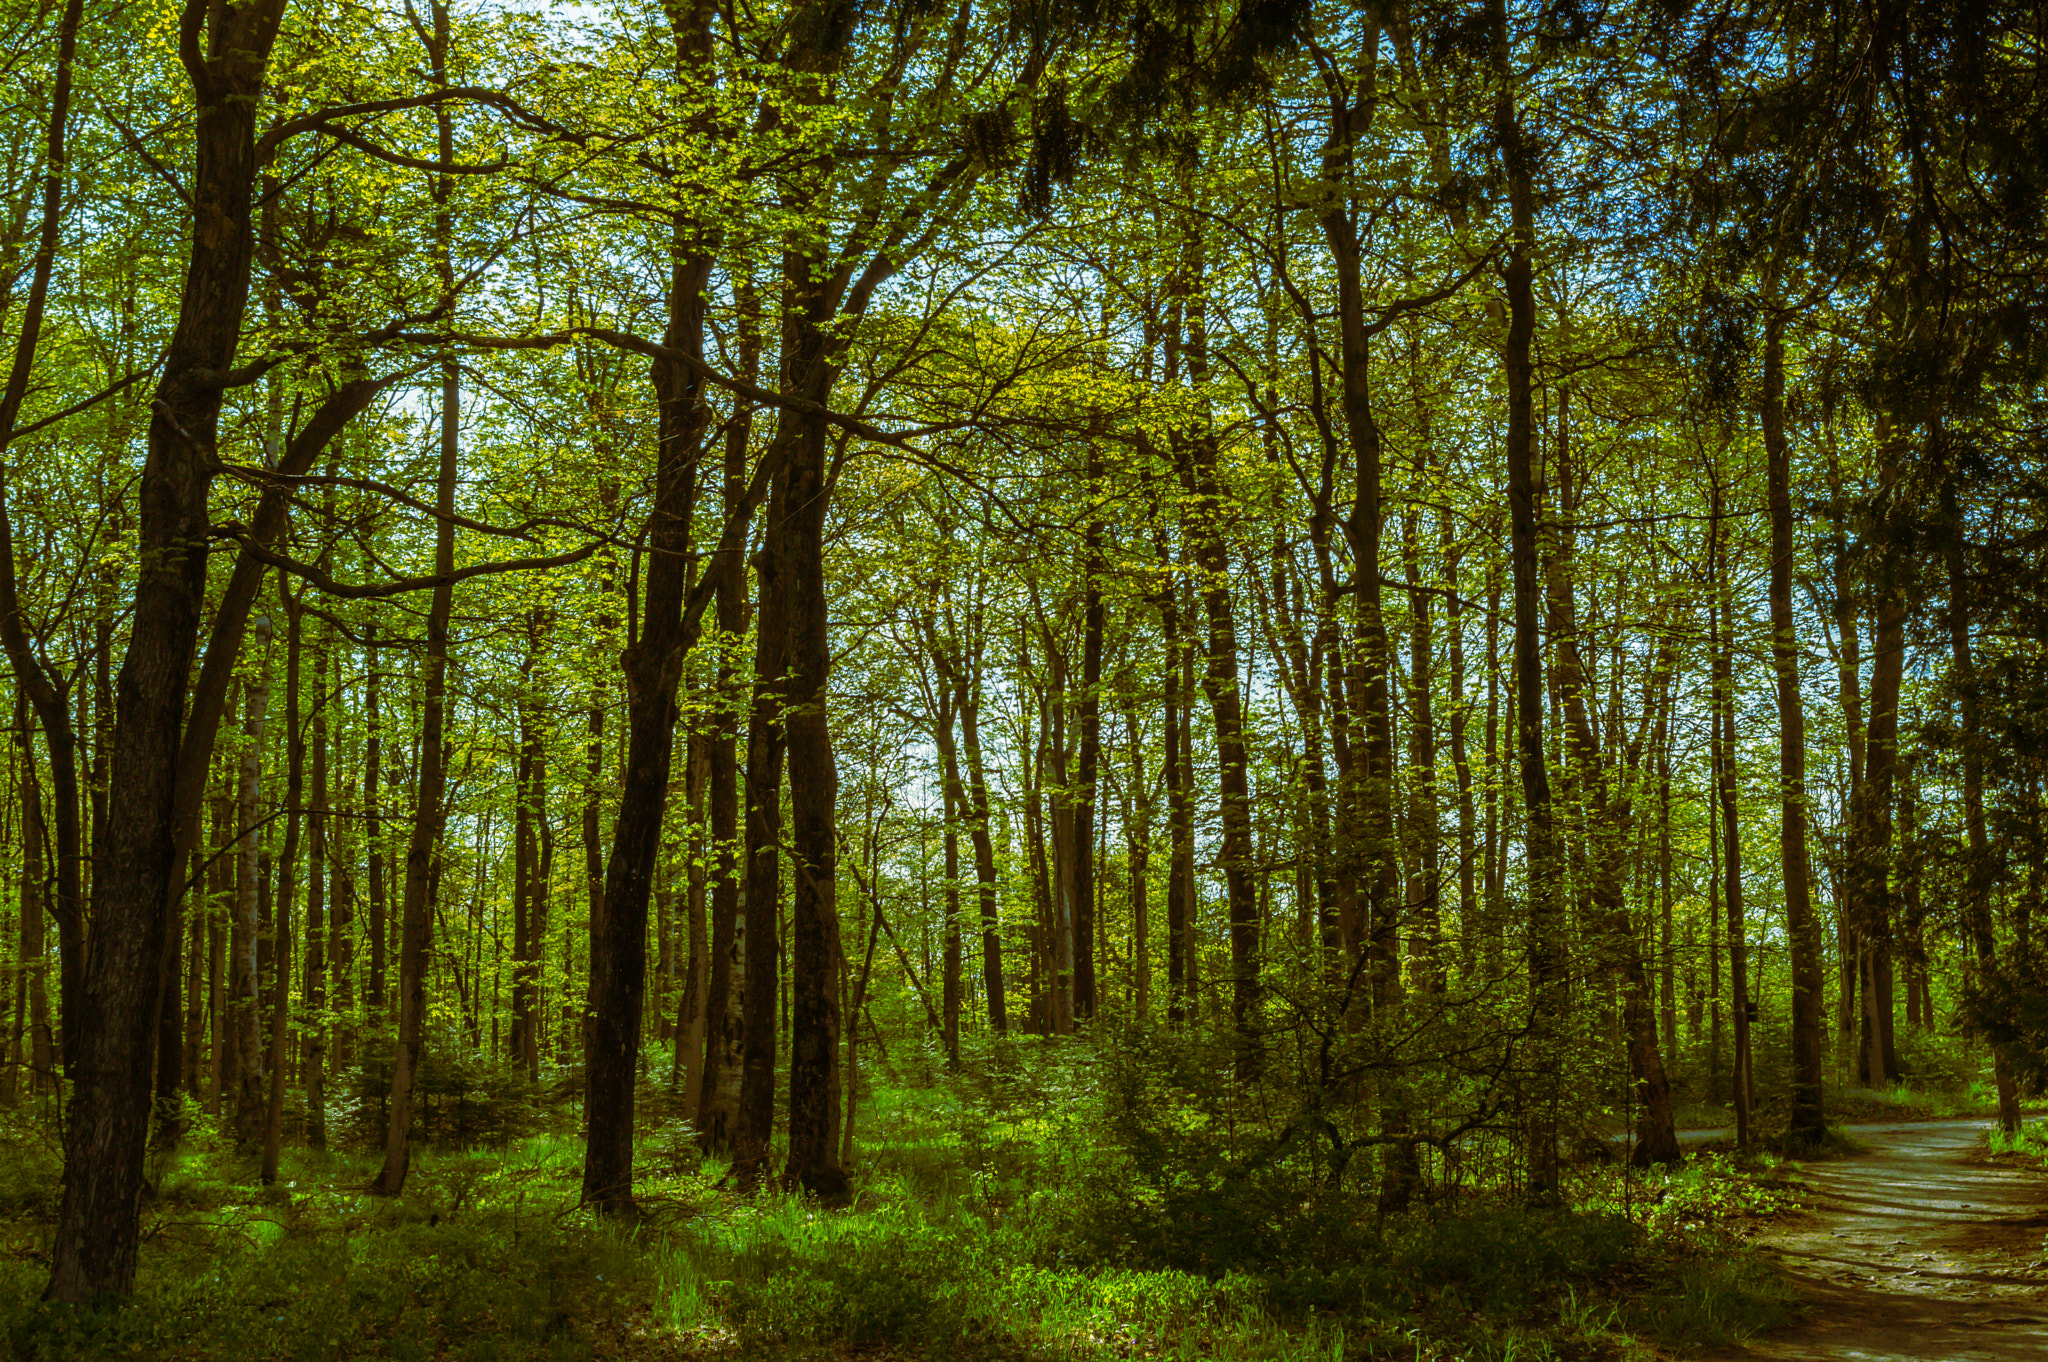 Pentax K-3 sample photo. The trees and the forest photography